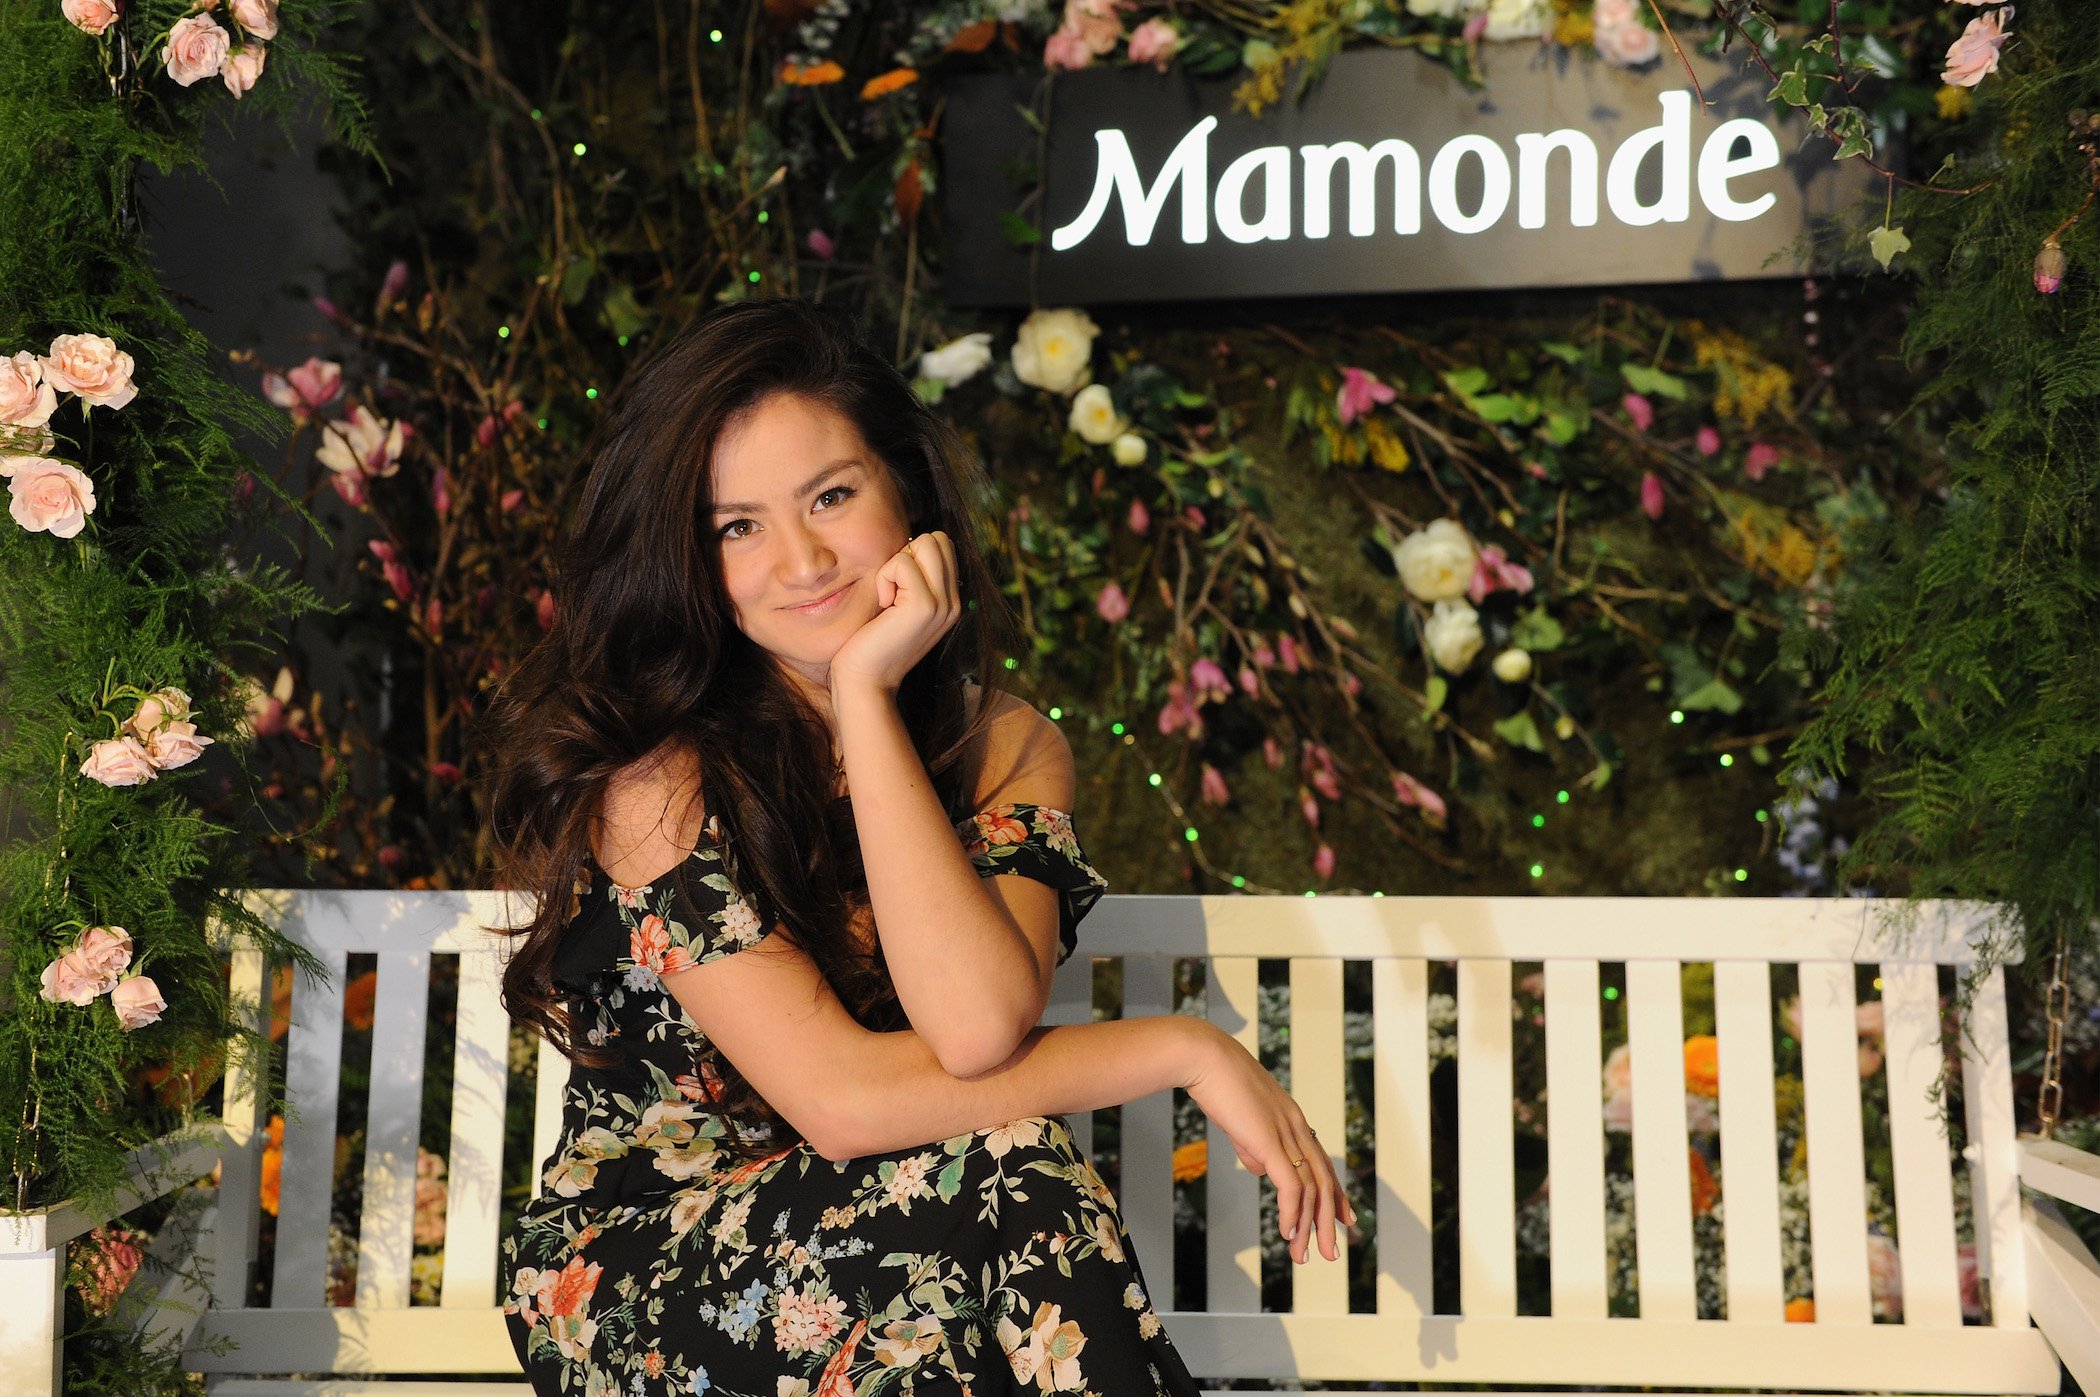 'The Bachelor' star Caila Quinn sitting and smiling against a floral background